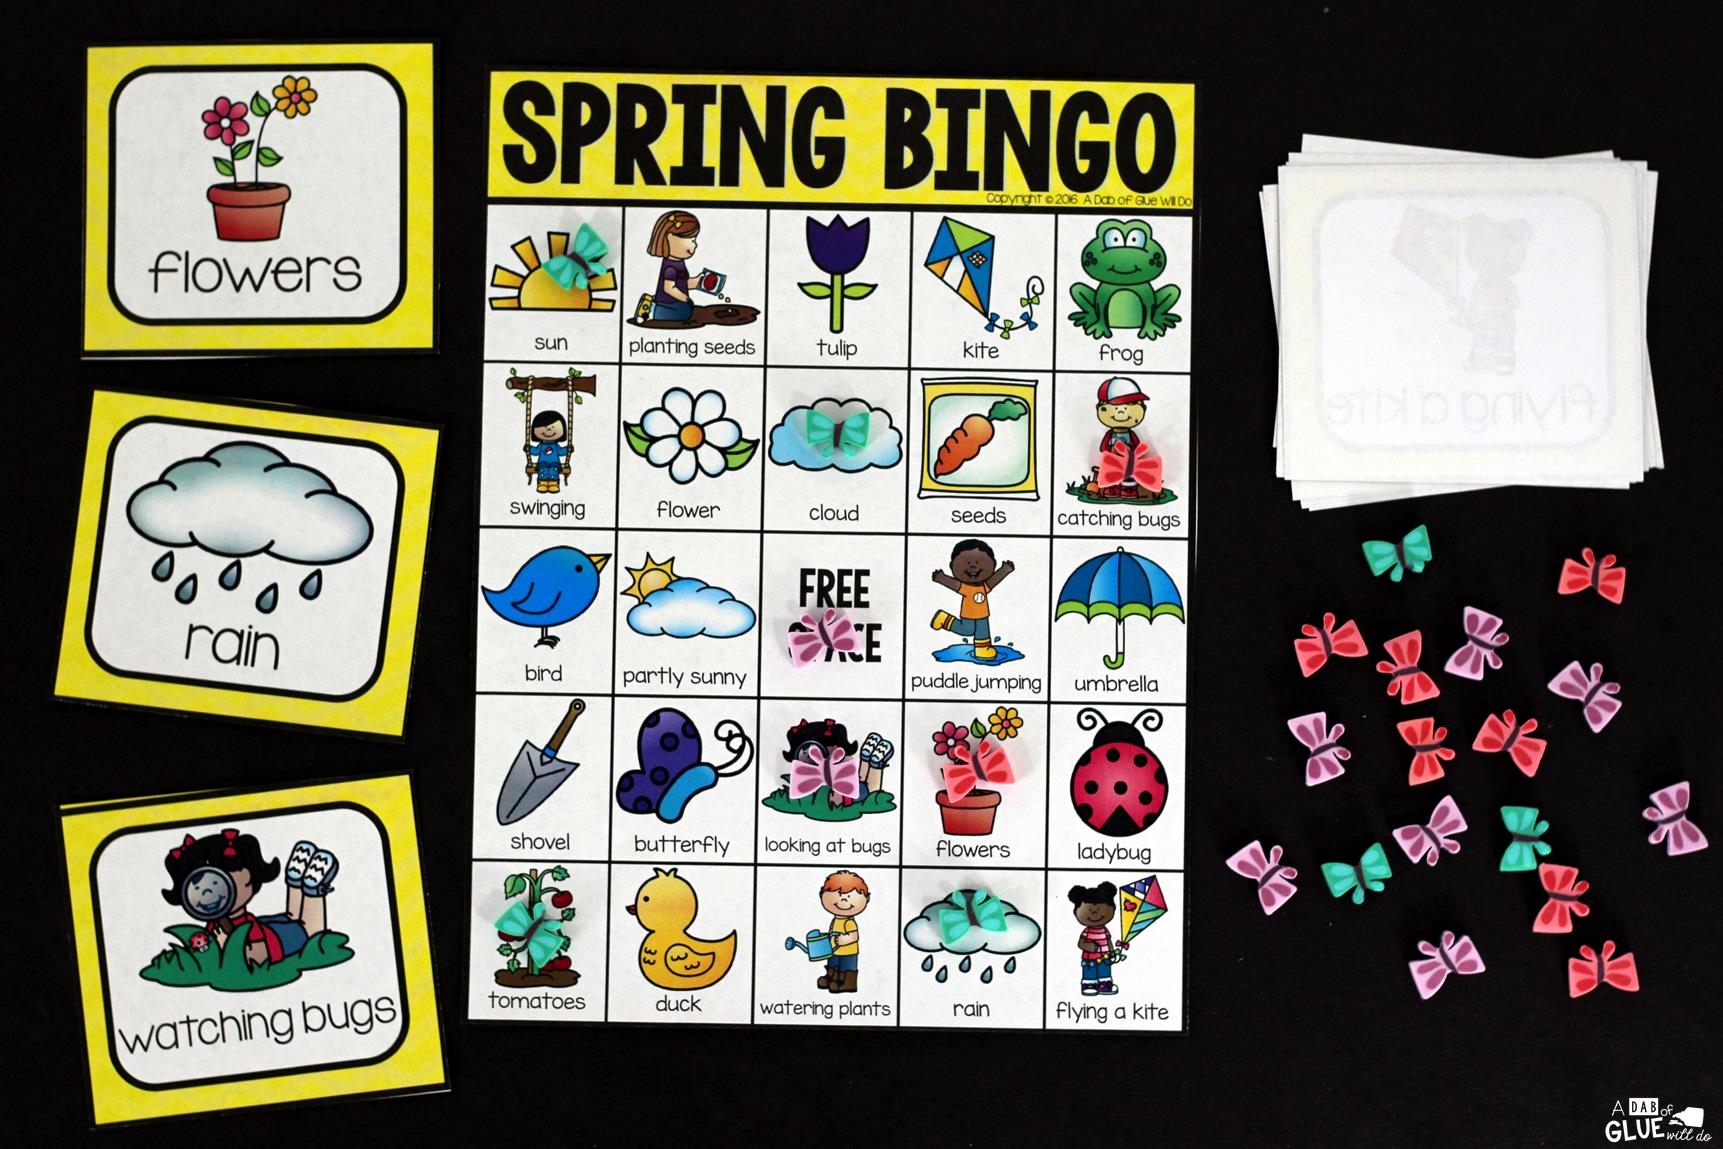 Play Bingo with your elementary age students for a fun spring themed game! Perfect for large groups in your classroom or small review groups. Add this to your spring lesson plans or spring class party with 30 unique spring Bingo boards! Teaching cards are also included in this fun game for young children! Black and white options available to save your color ink. 